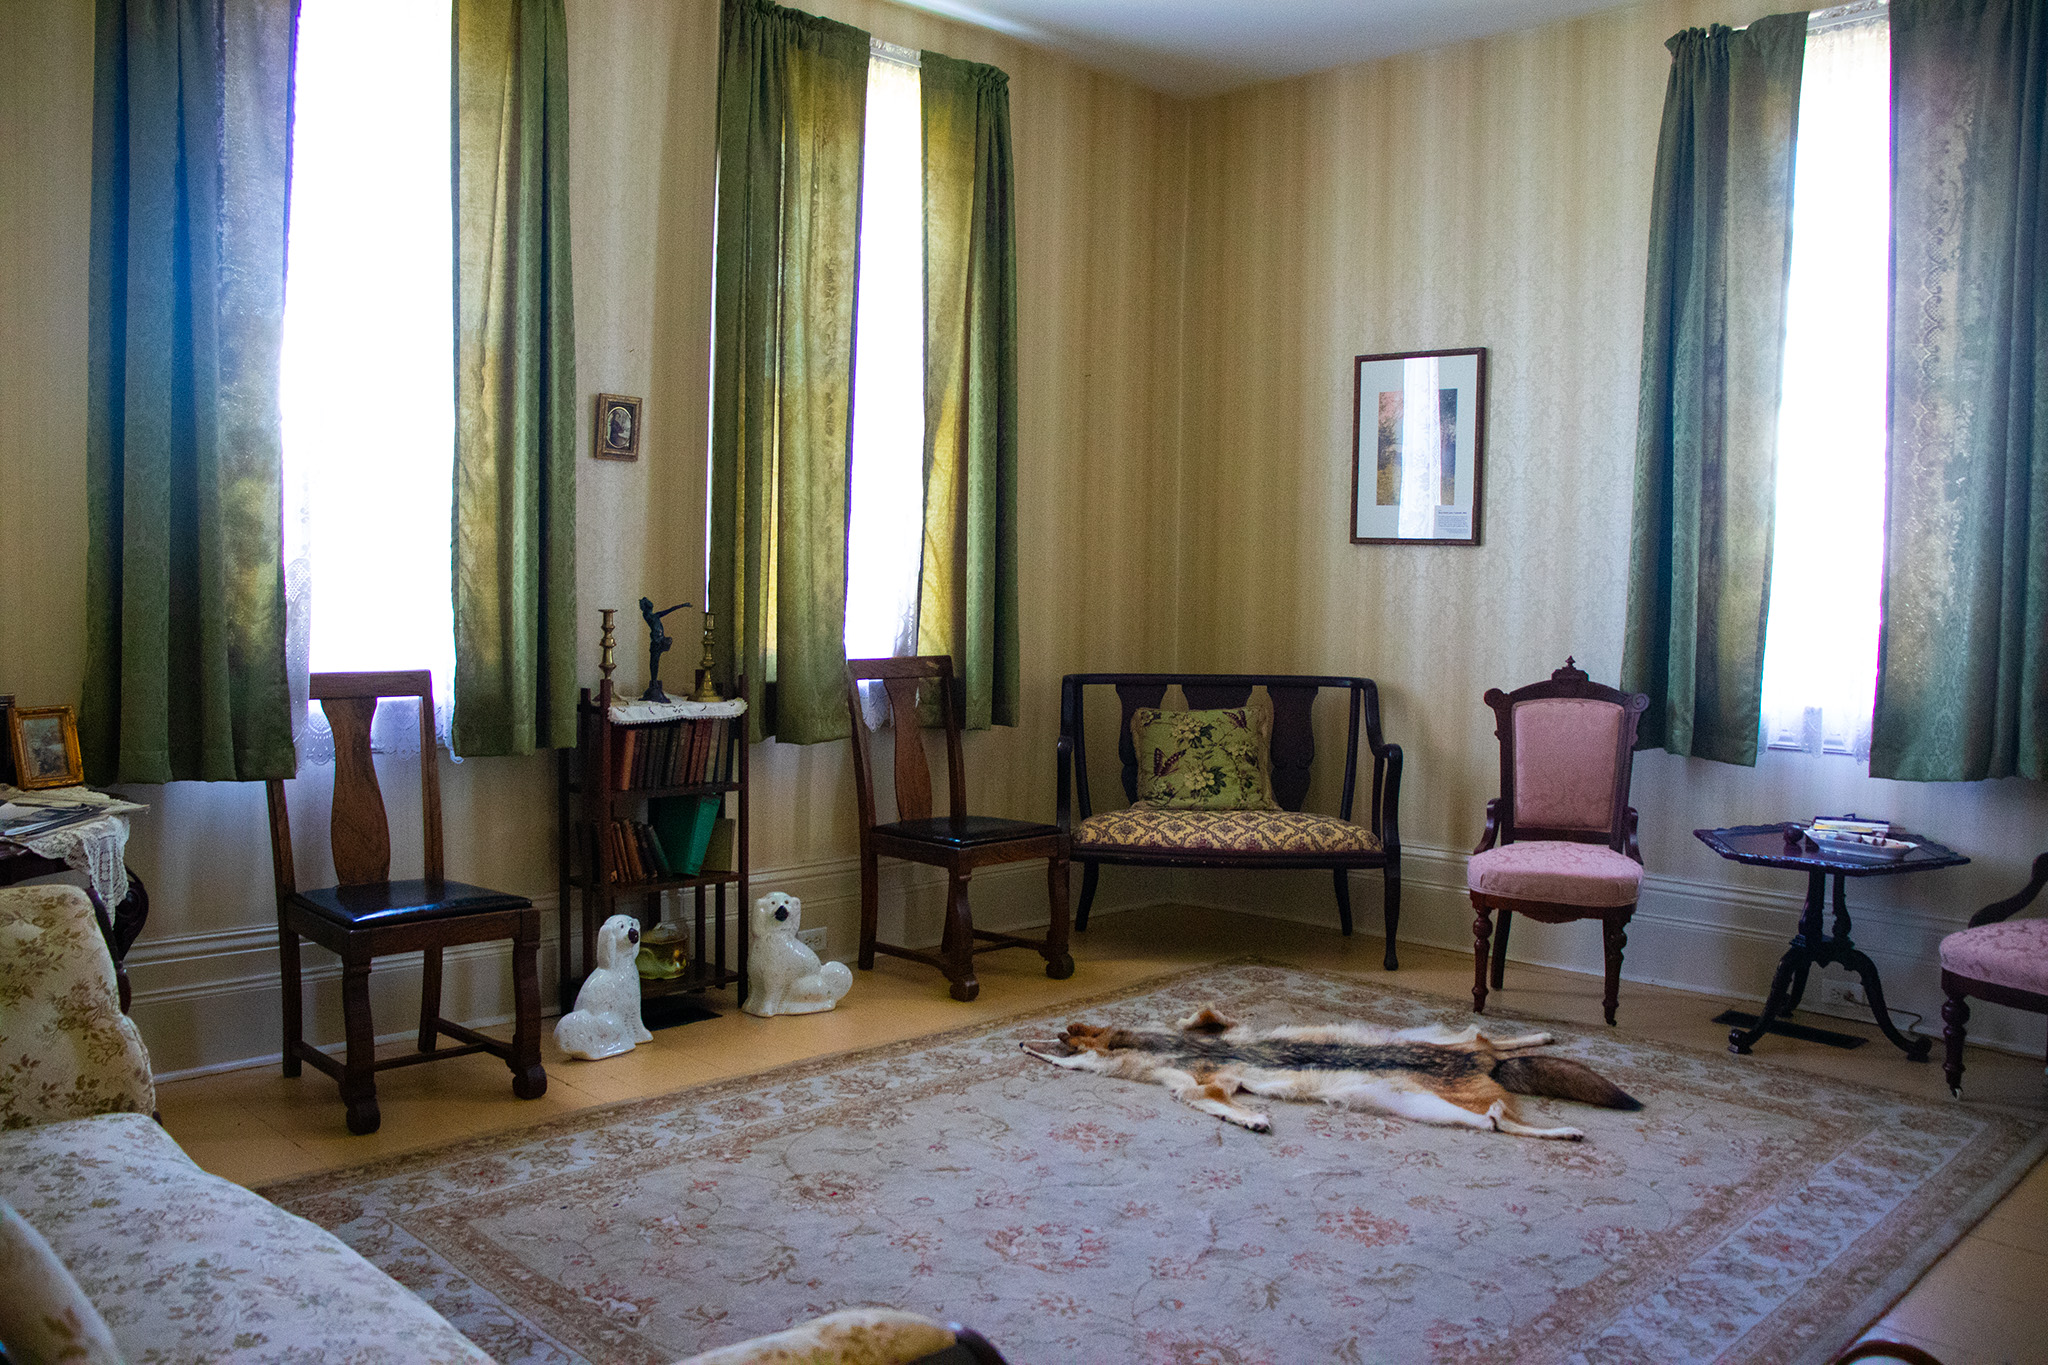 Image of the parlour room in Lucy Maud Montgomery's Leaskdale Manse